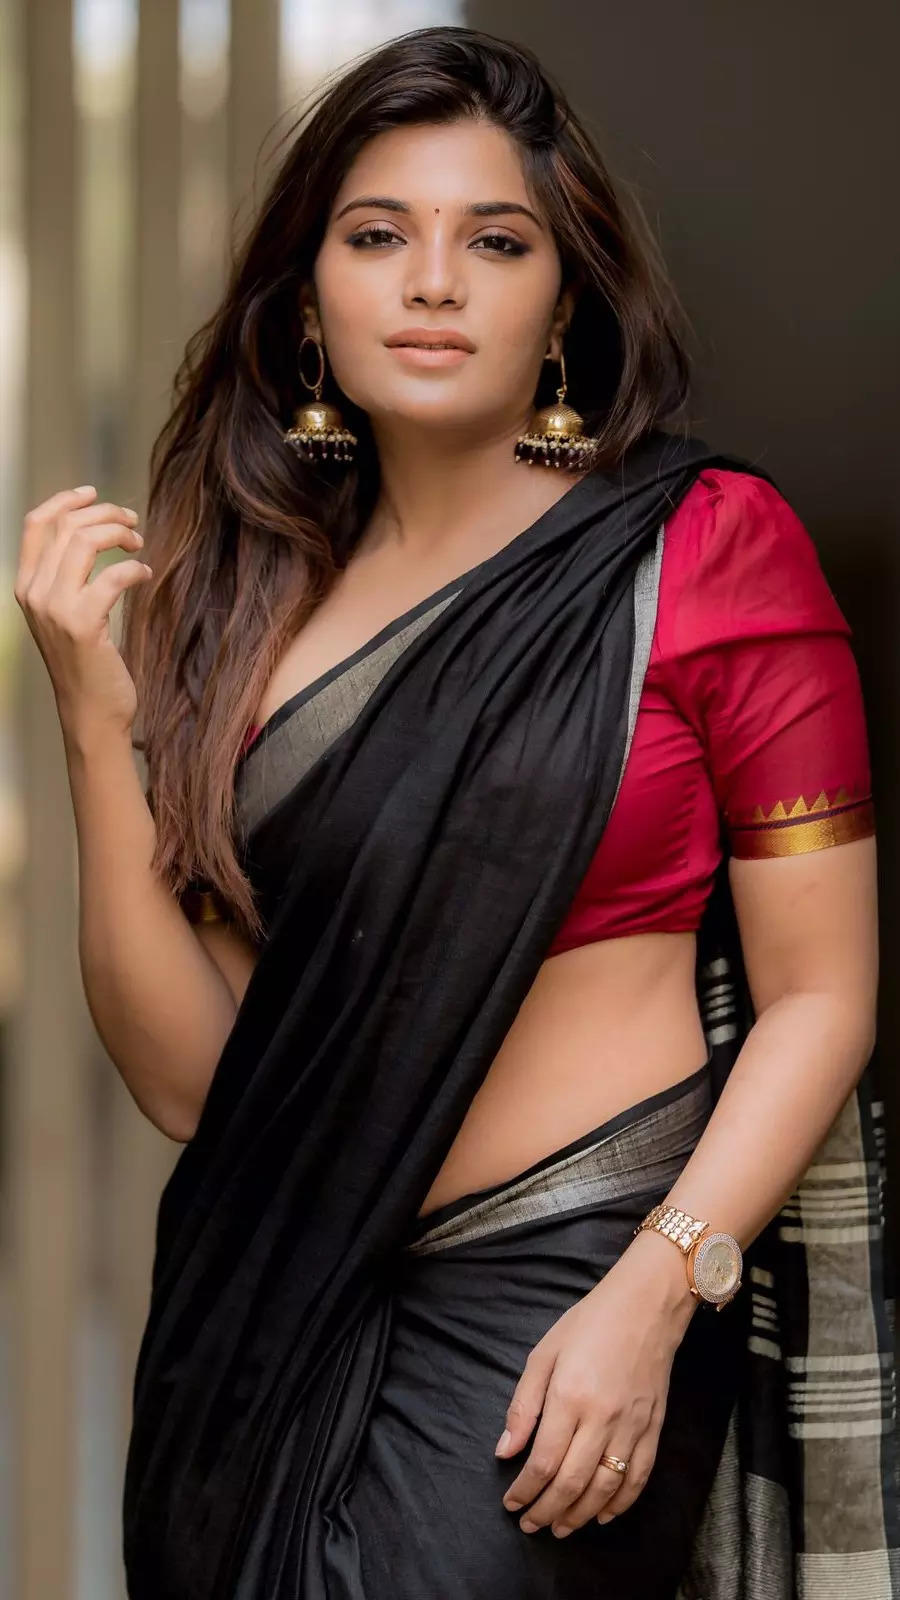 Breathtaking pictures of Aathmika in saree